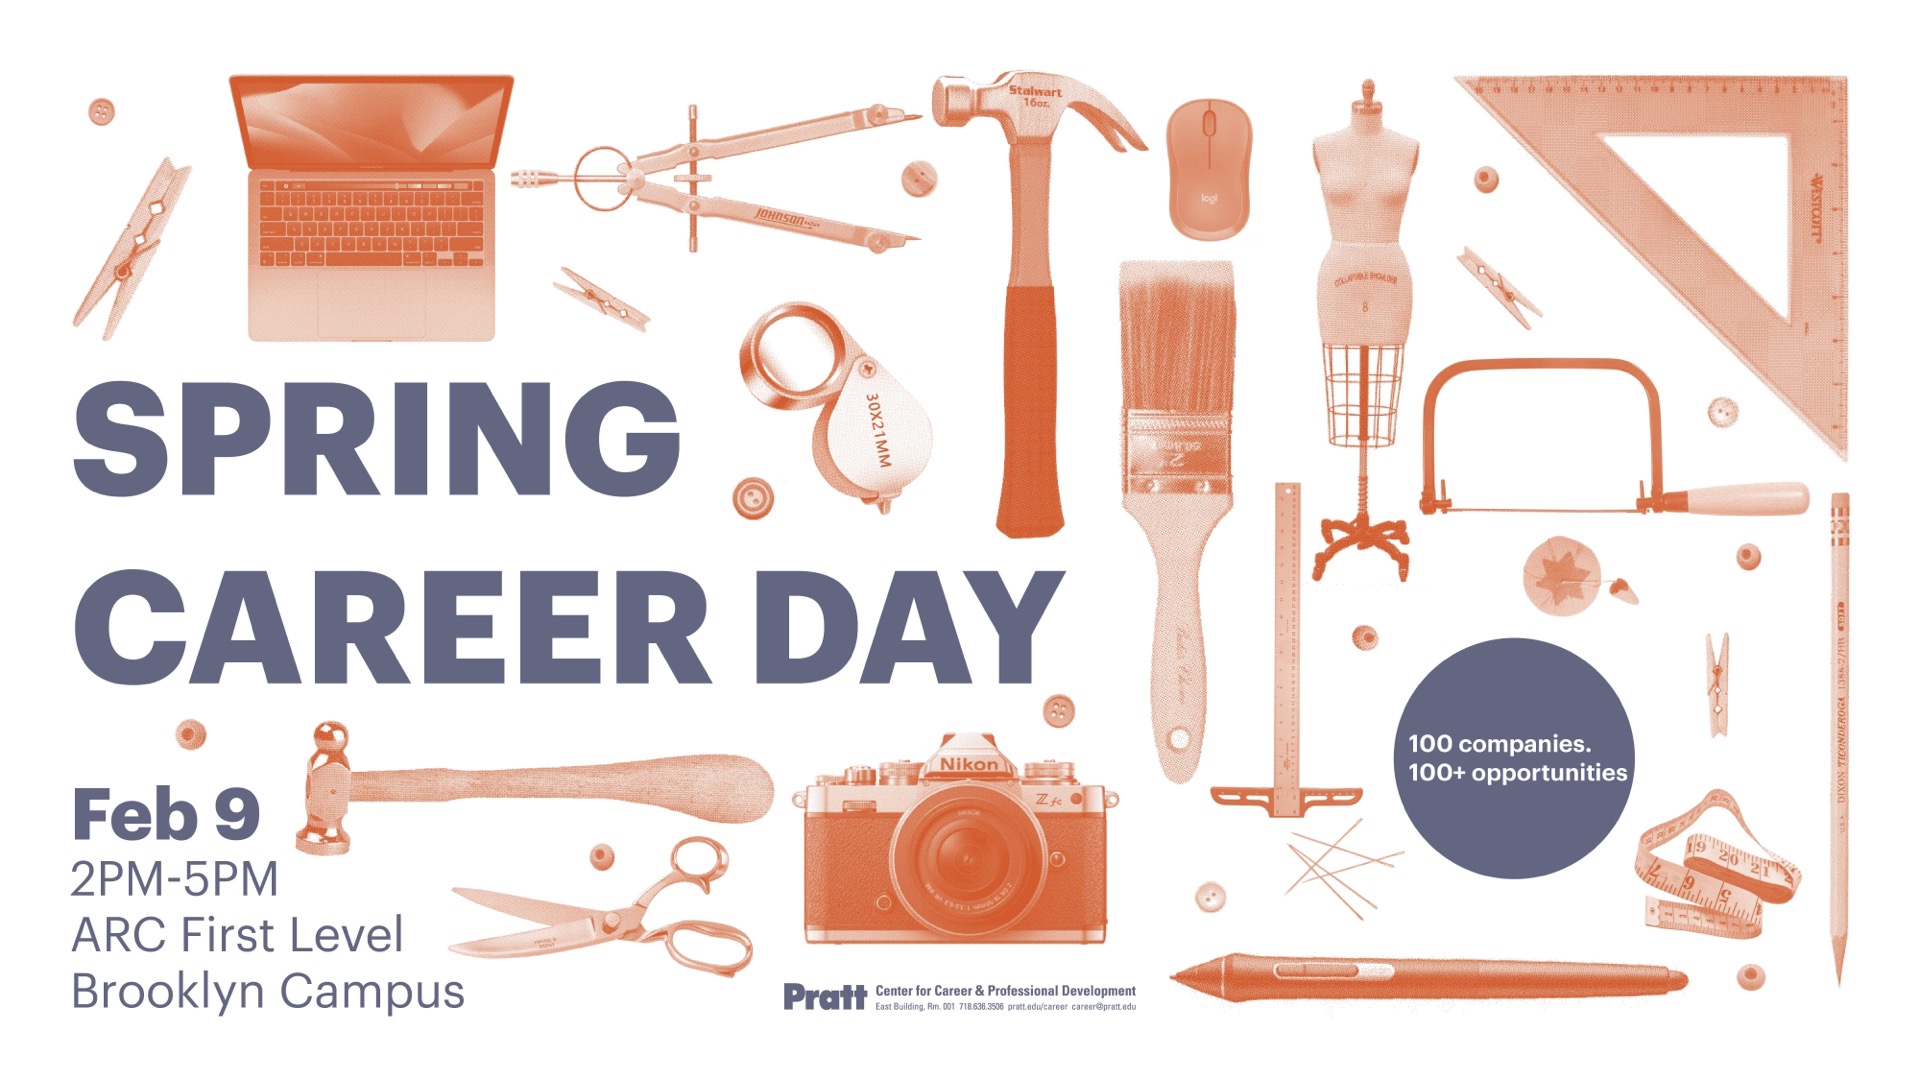 Spring Career Day Poster, Friday, February 9th from 2pm-5pm in the ARC. 100 Companies, 100 Opportunities. Images shows pictures of artist tools such as paint brushes, cameras, laptops, rulers, hammer, scissors